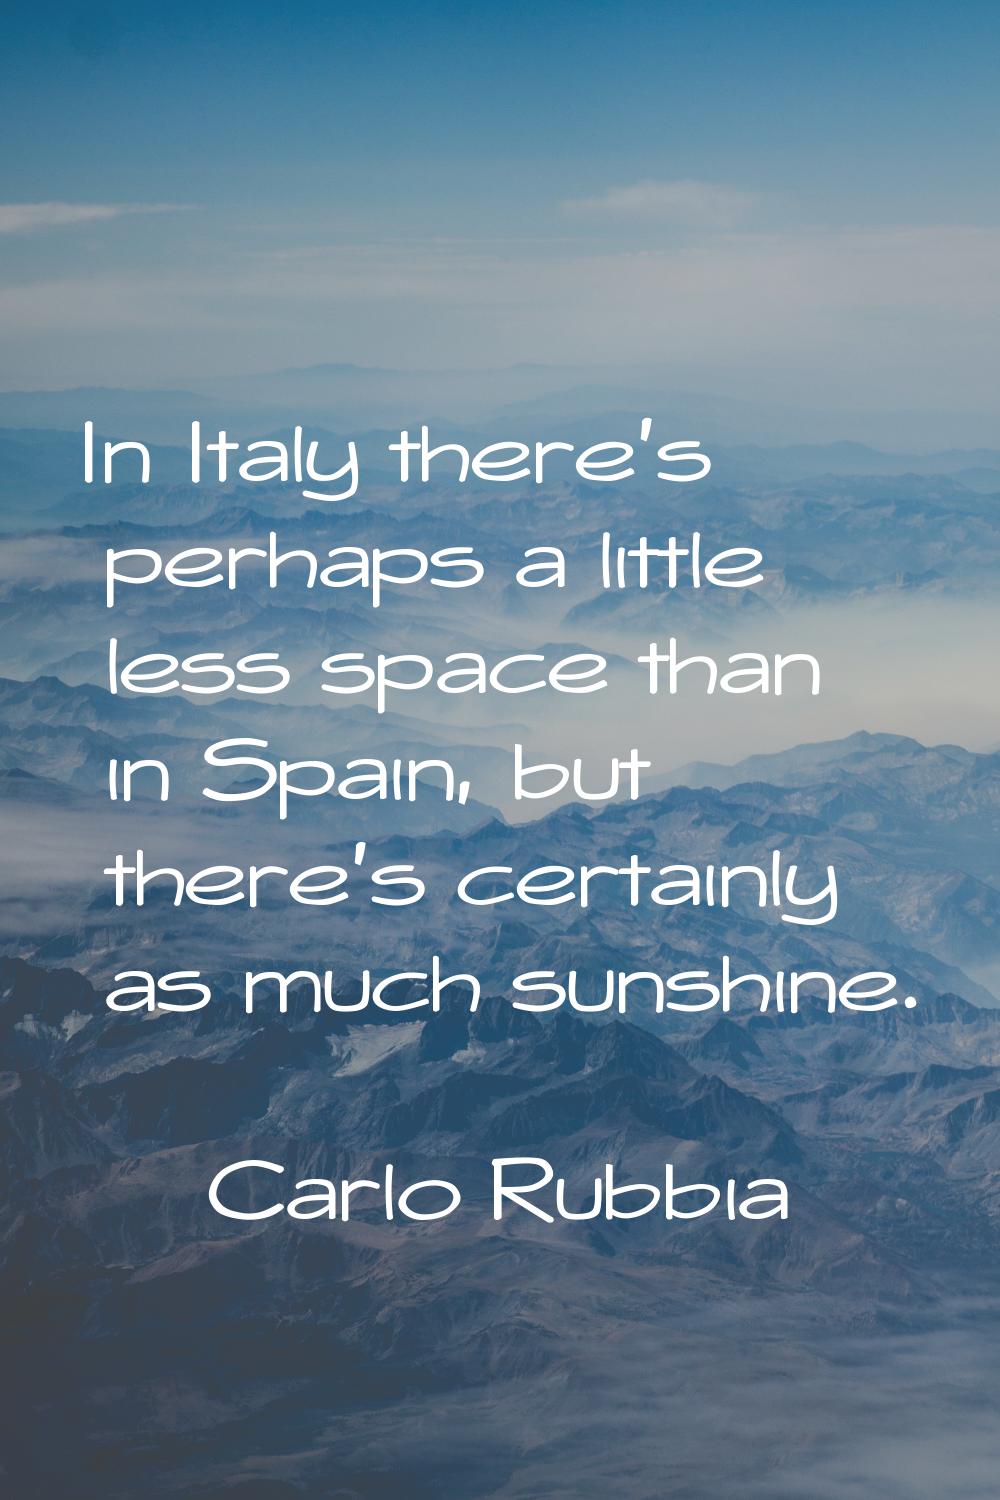 In Italy there's perhaps a little less space than in Spain, but there's certainly as much sunshine.